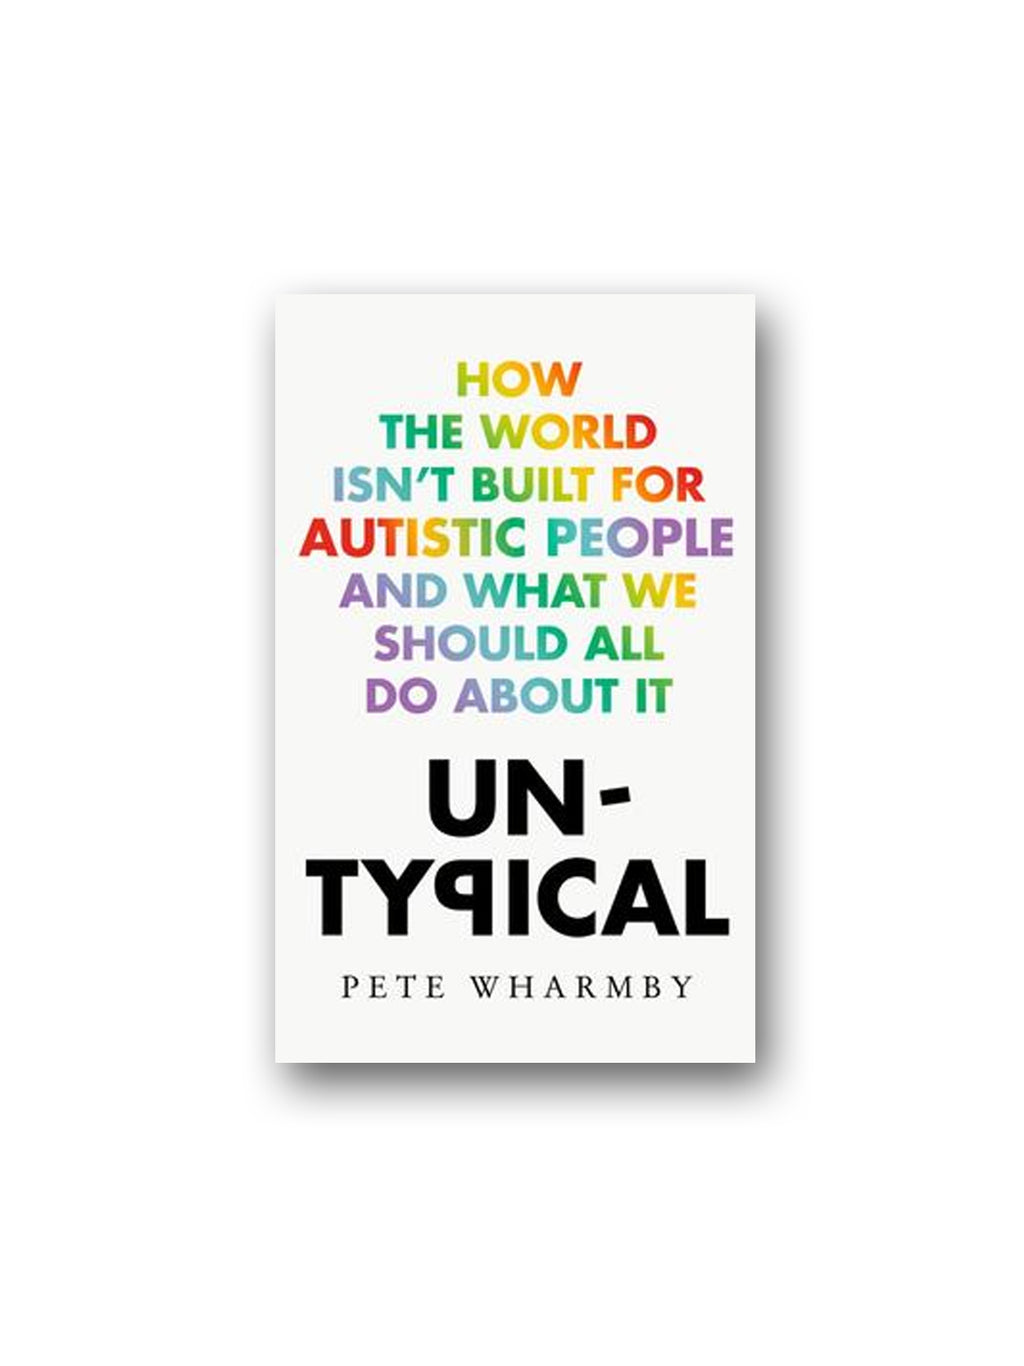 Untypical : How the World Isn't Built for Autistic People and What We Should All Do About It